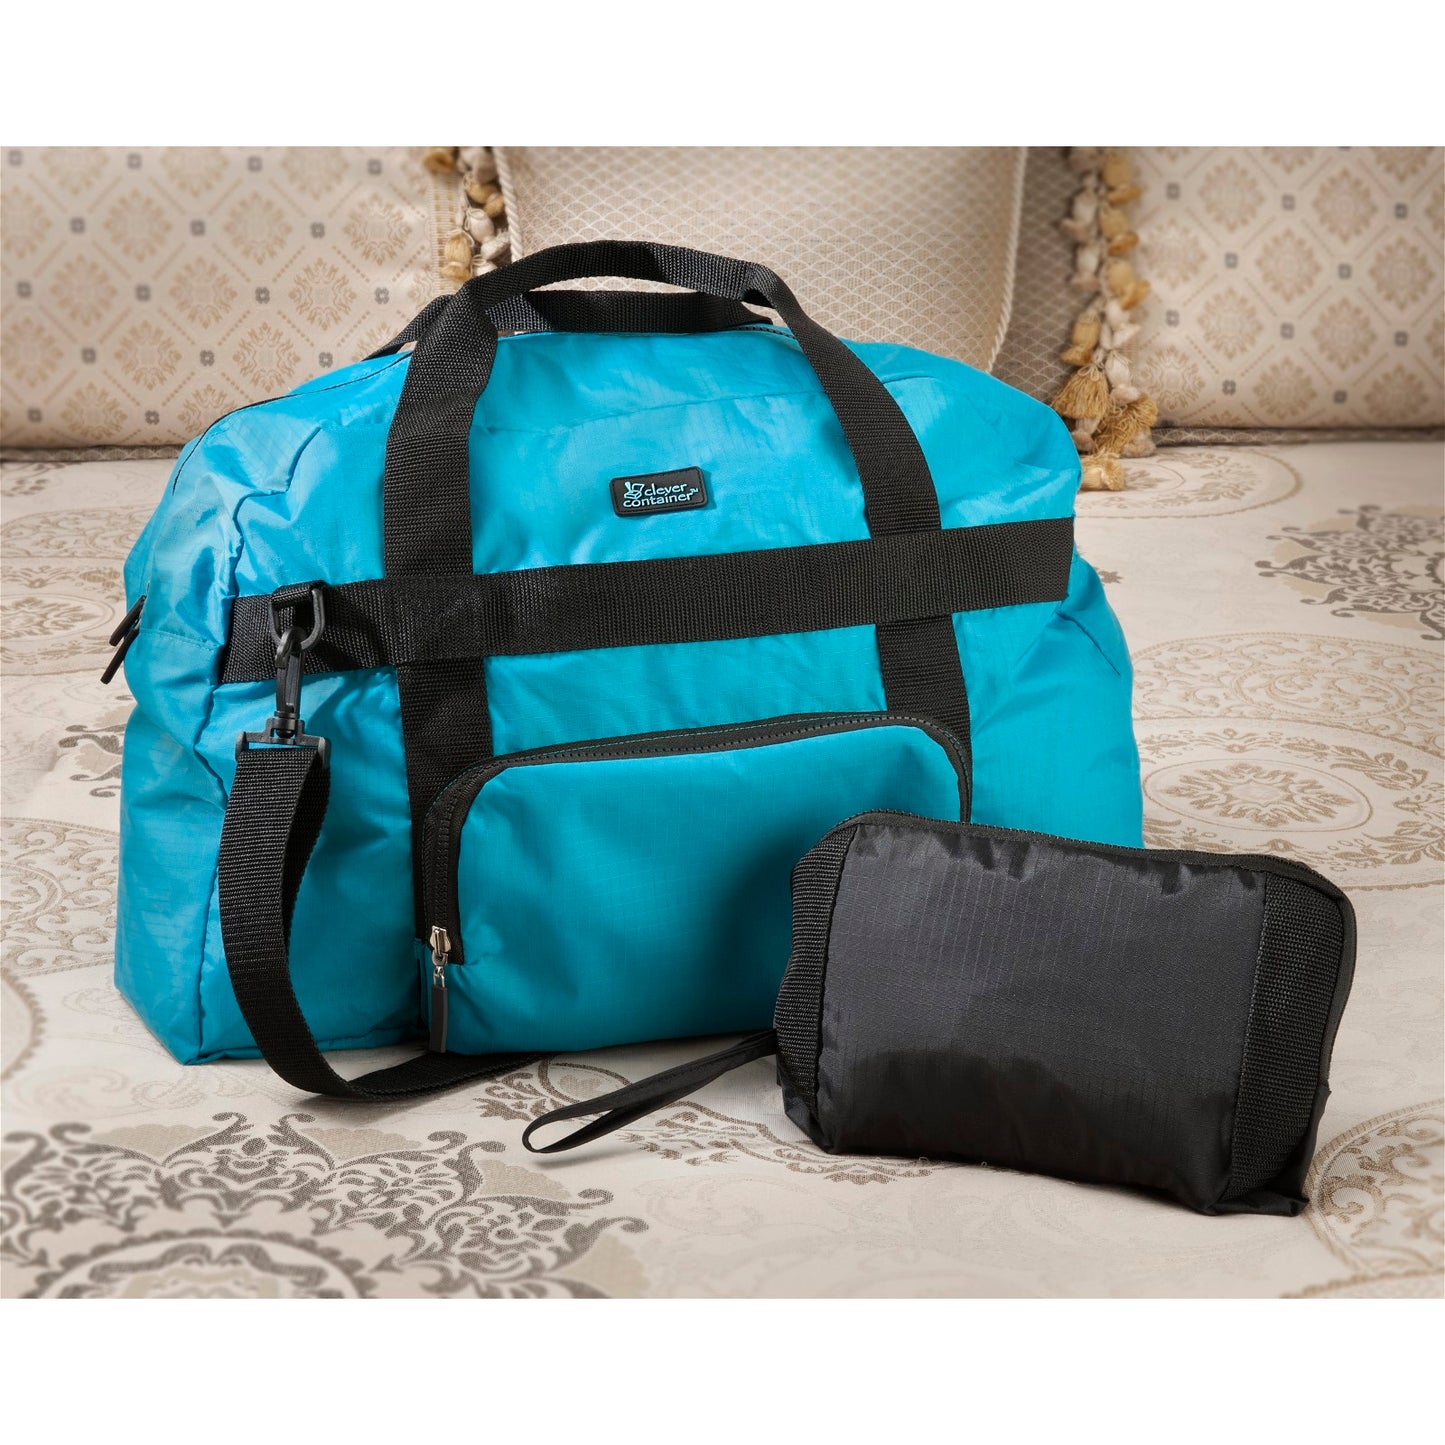 Collapsible Travel Bag - Color Teal